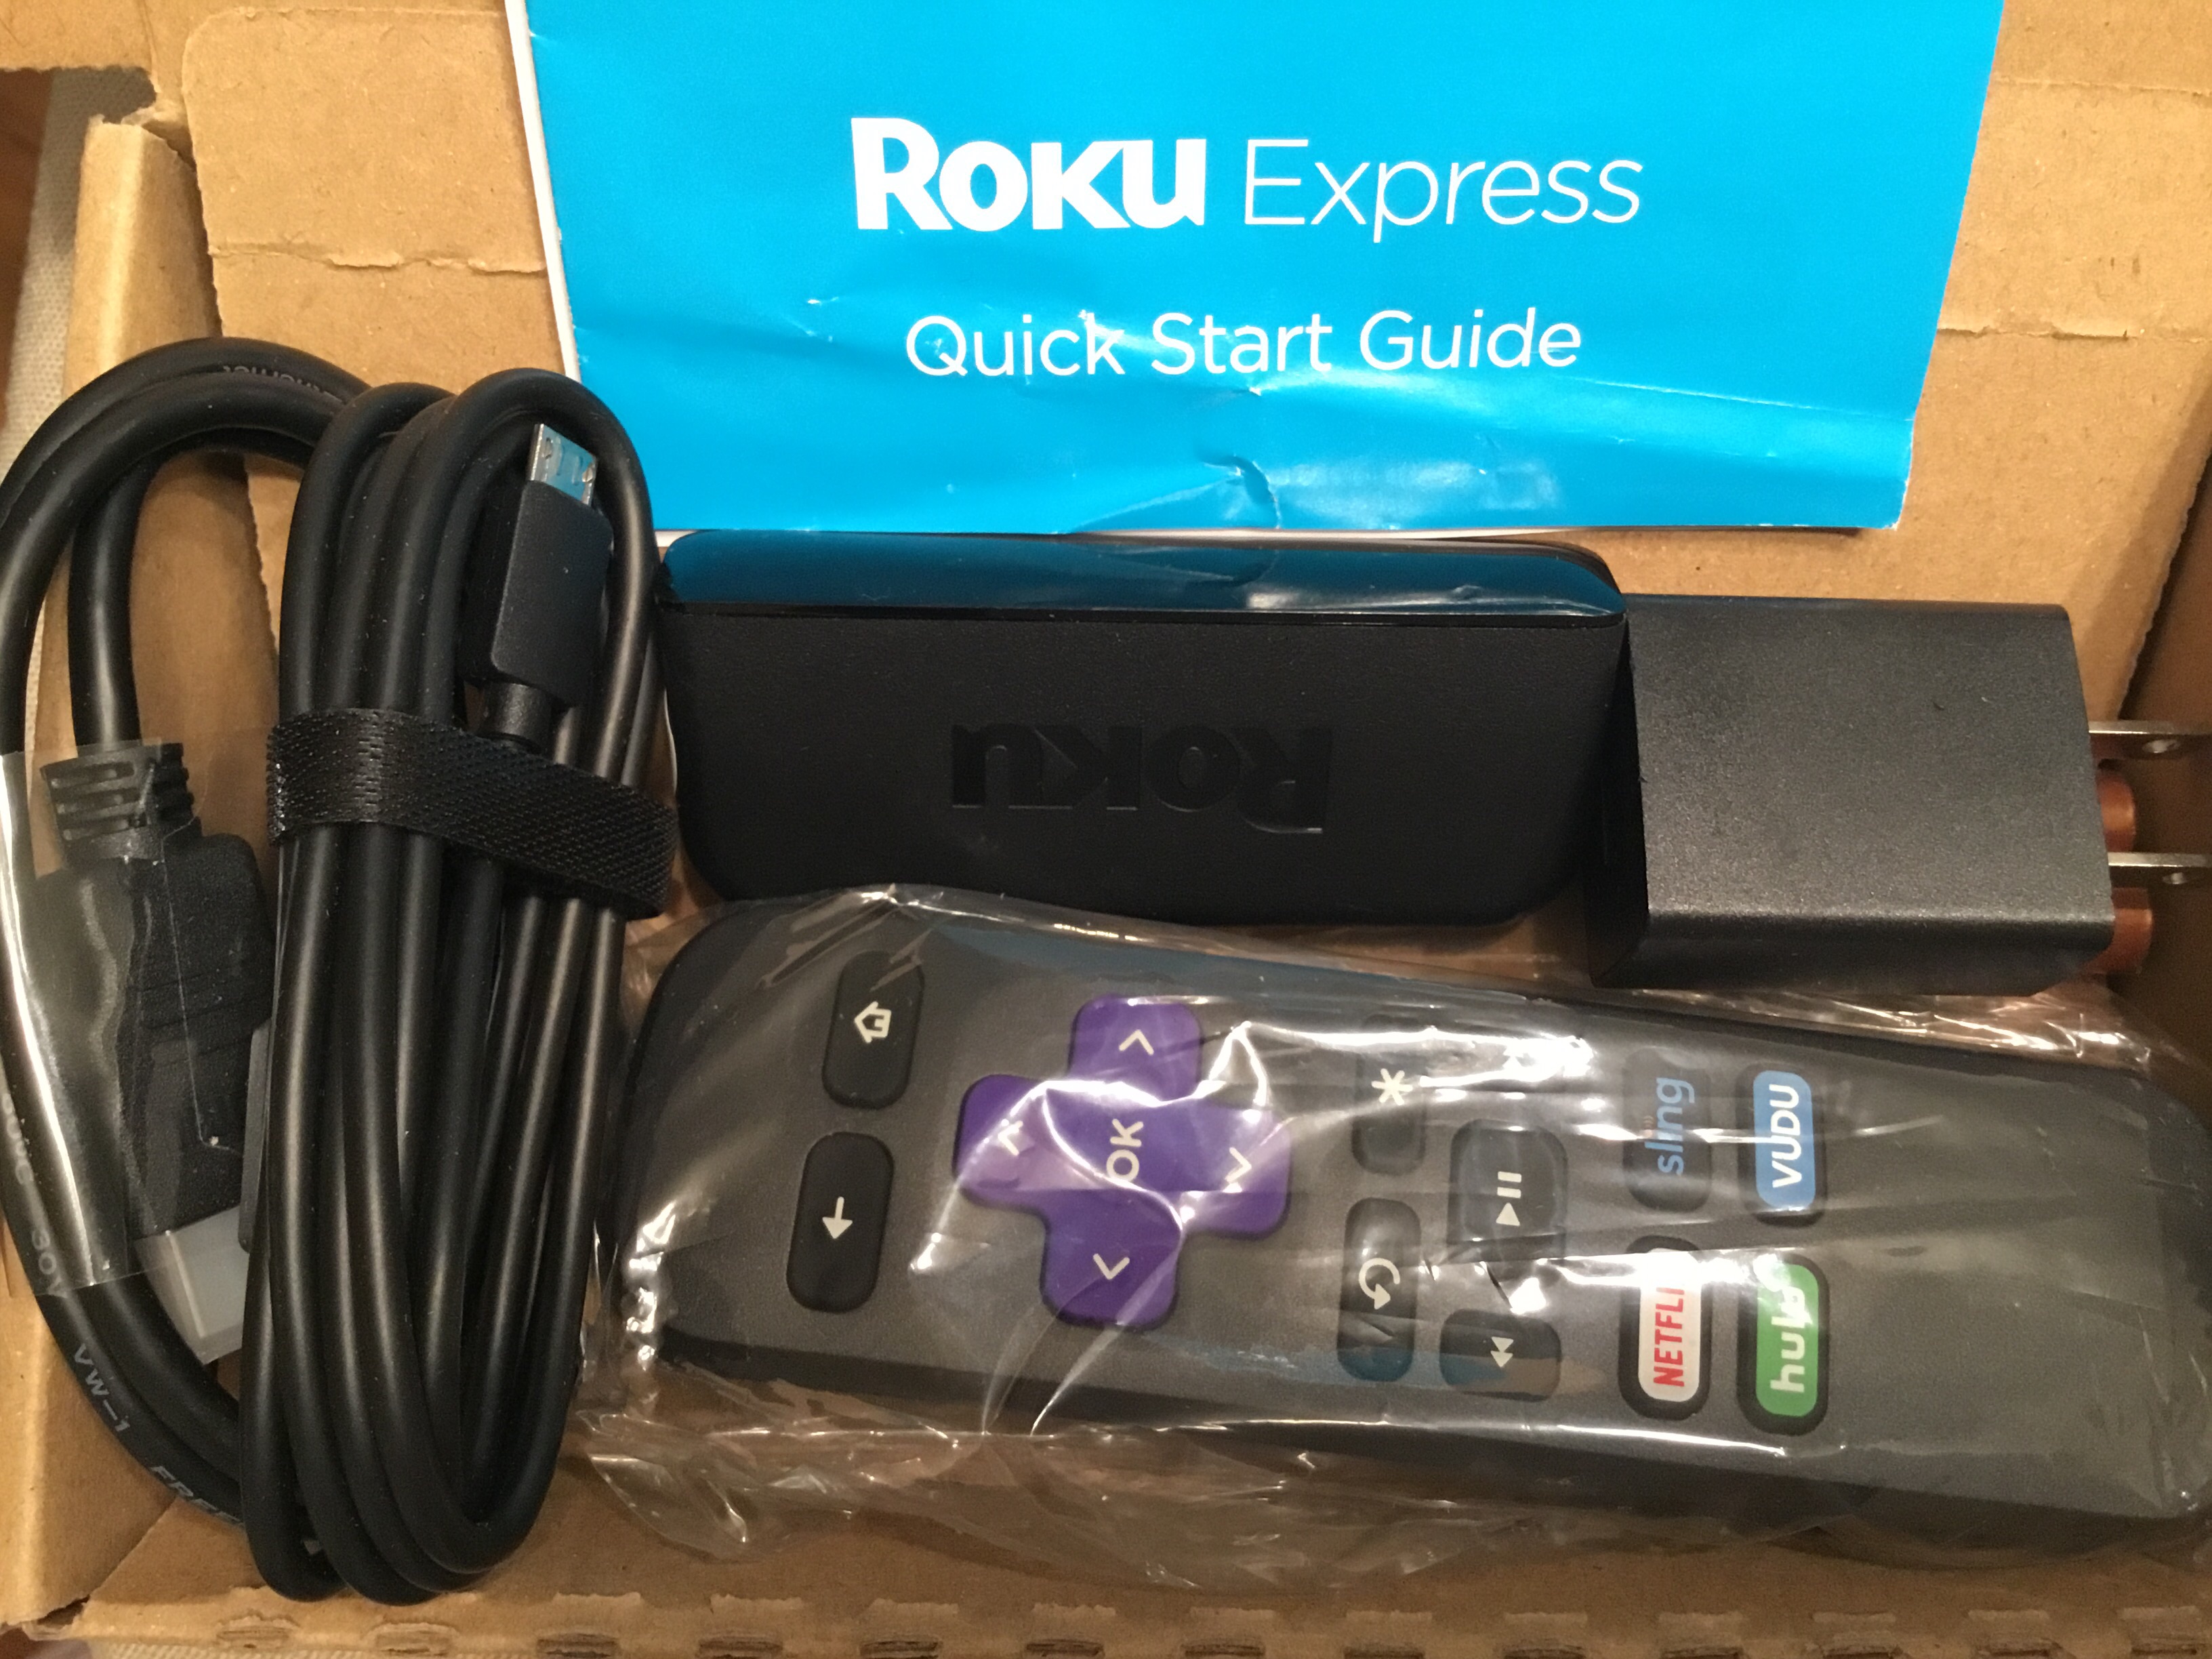 Hooking up a tv to an antenna and Roku without cable ...